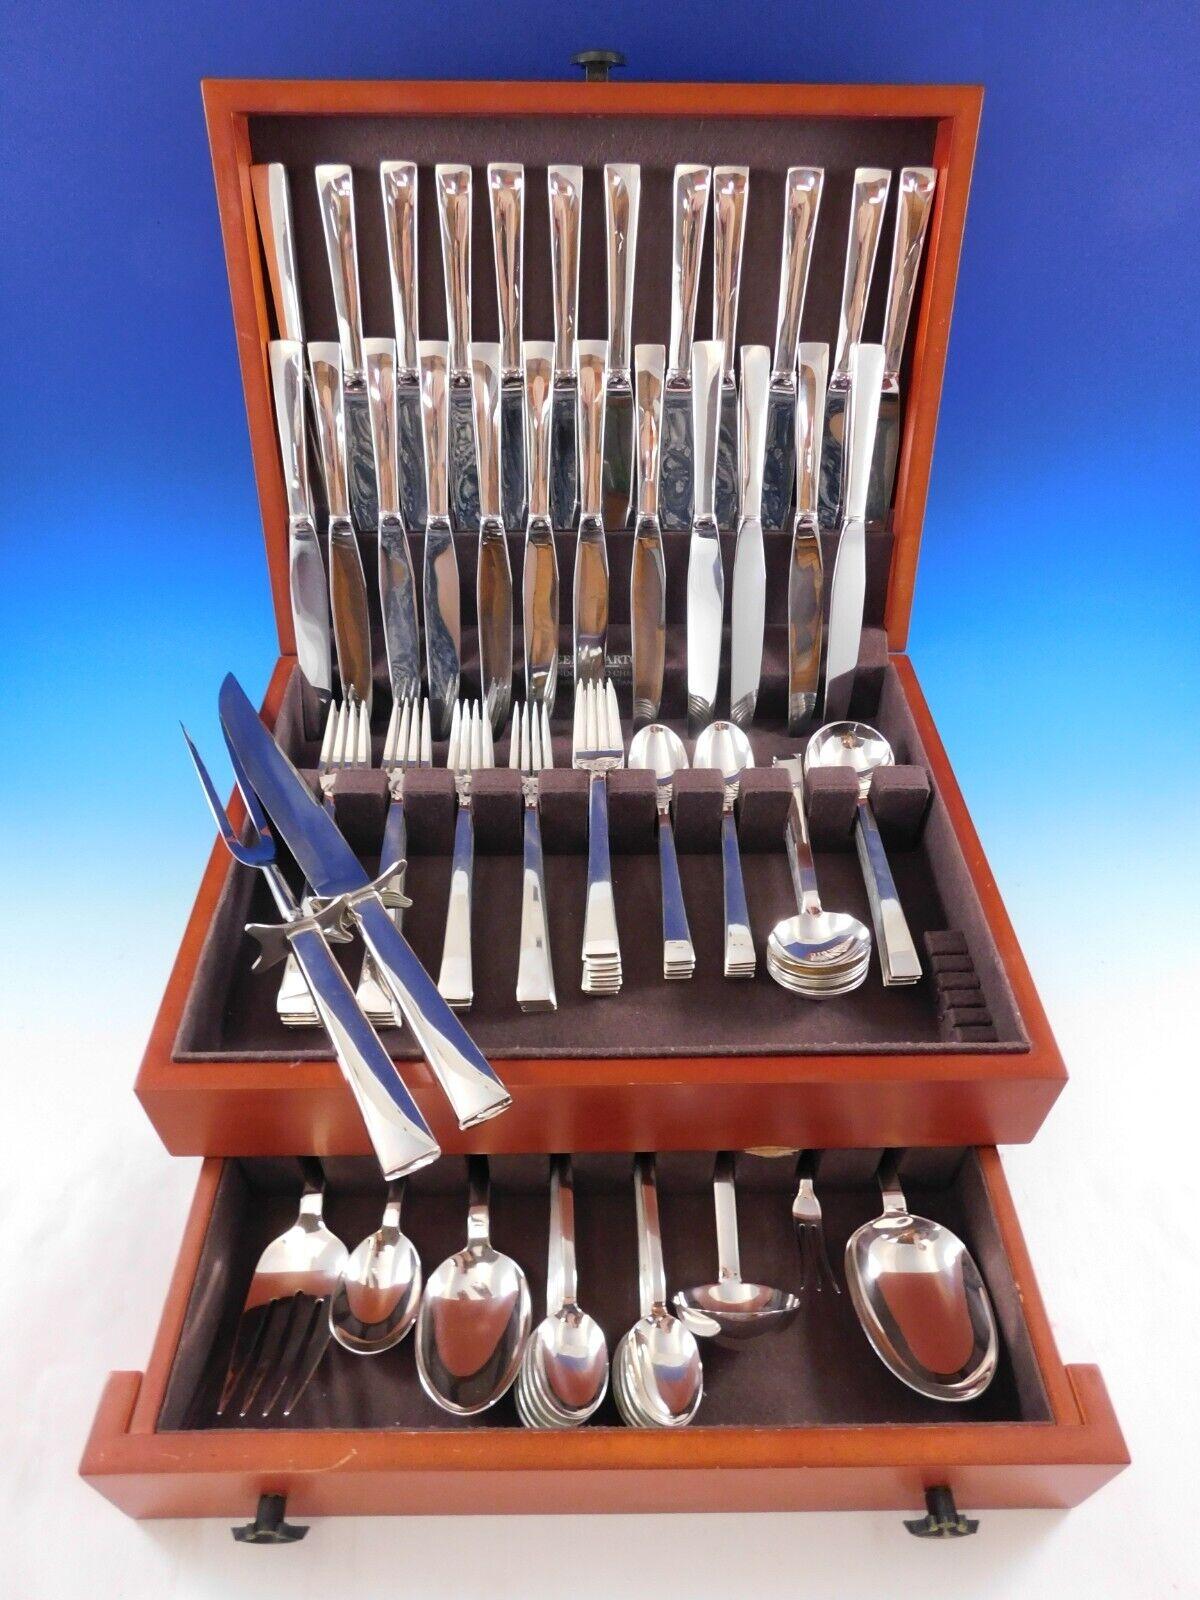 Continental is the perfect pattern choice for those who are looking for a highly polished, clean, contemporary look.

Continental by International Dinner and Luncheon Size Sterling Silver flatware set - 104 pieces. This set includes:


12 Dinner